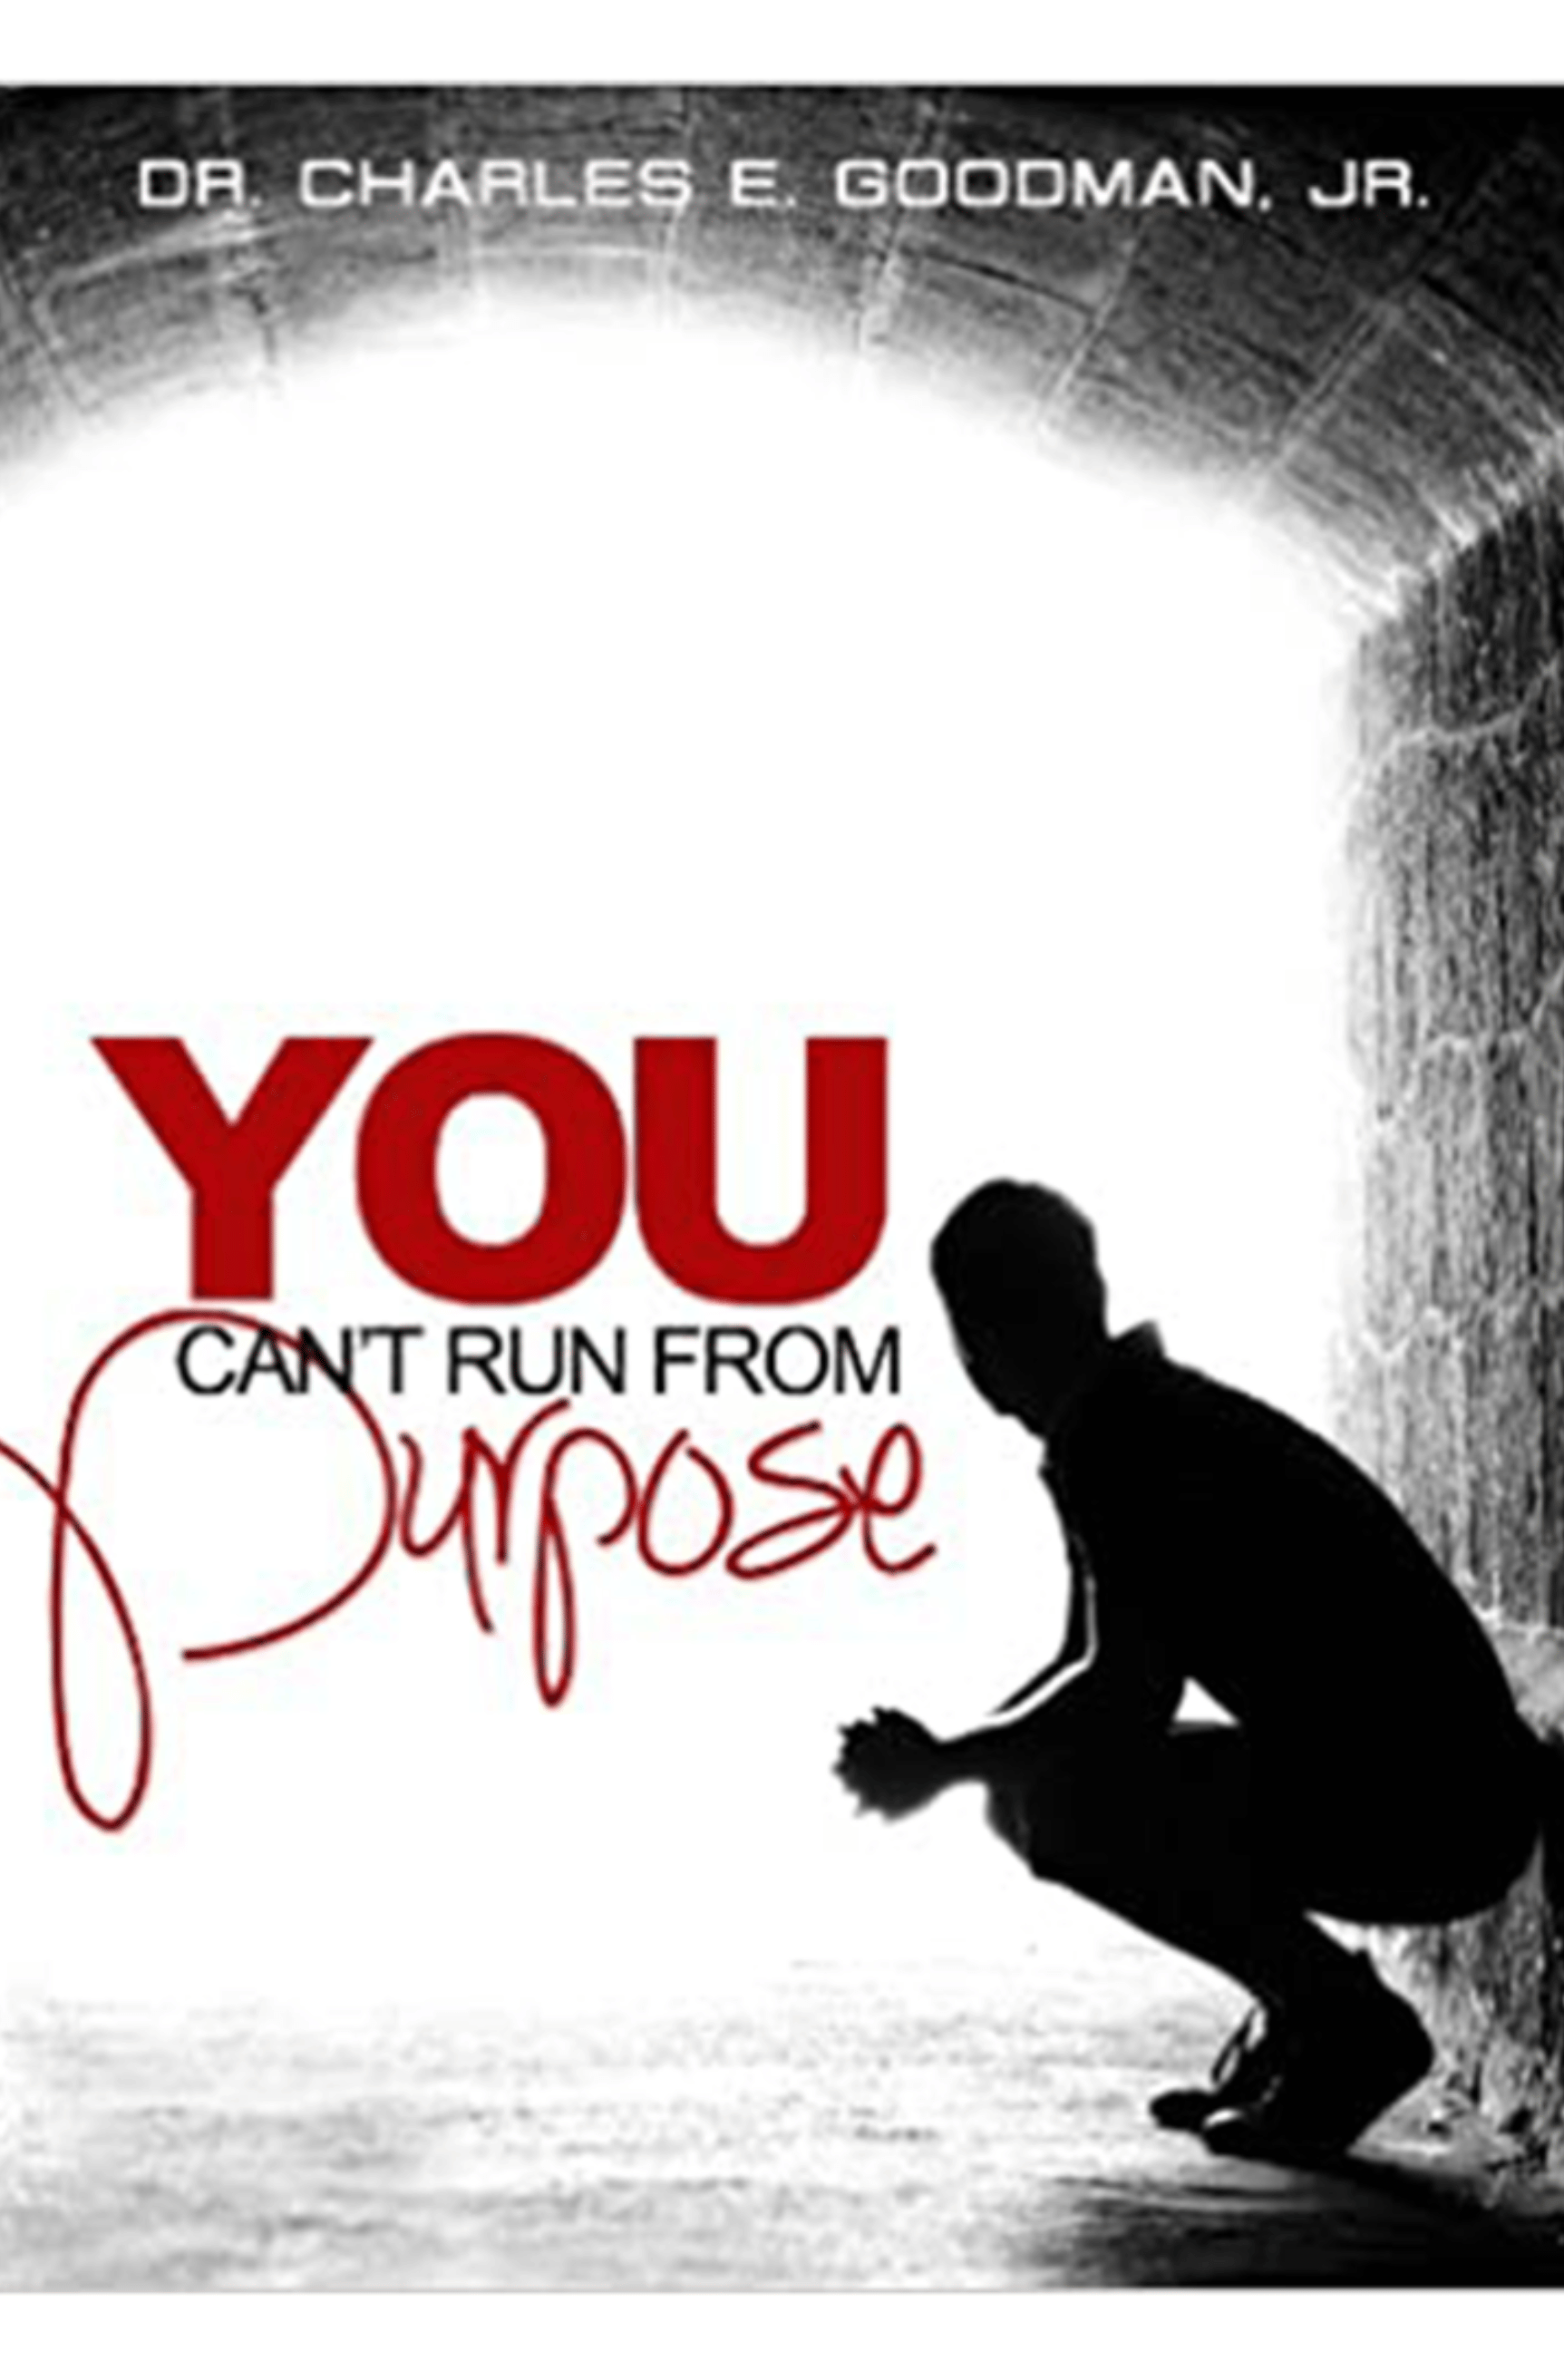 You Can’t Run From Purpose